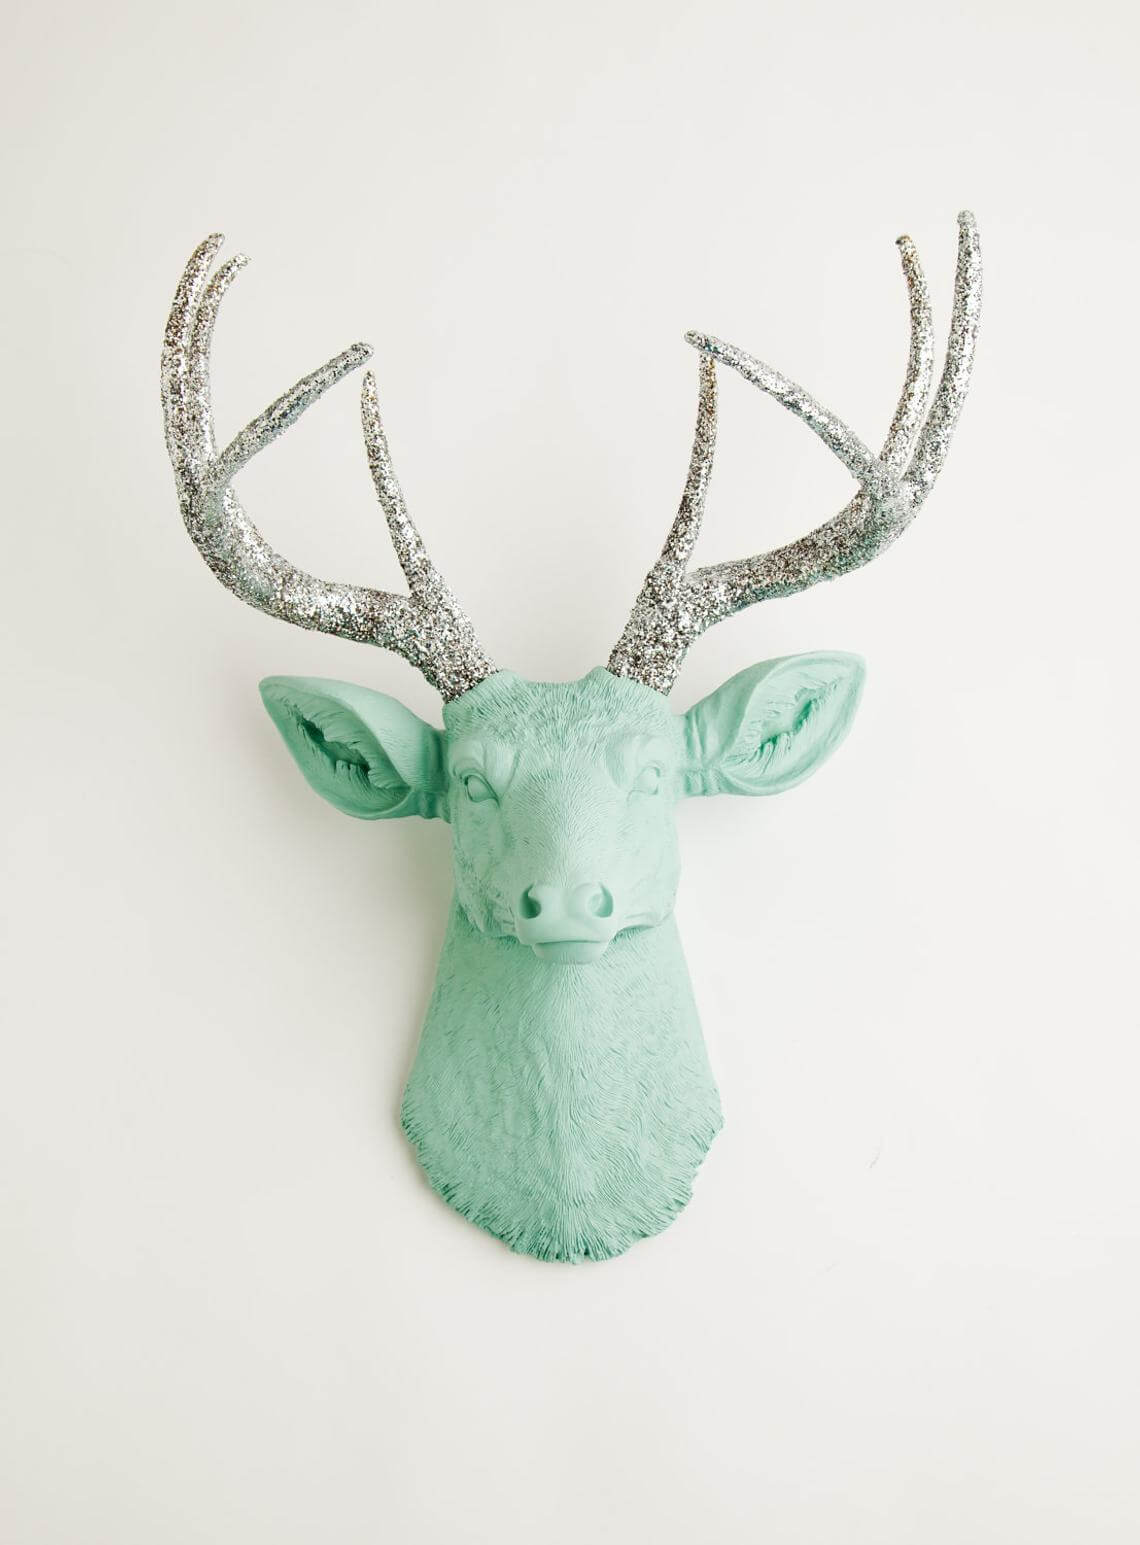 Mint Deer Head with Silver Glittered Antlers